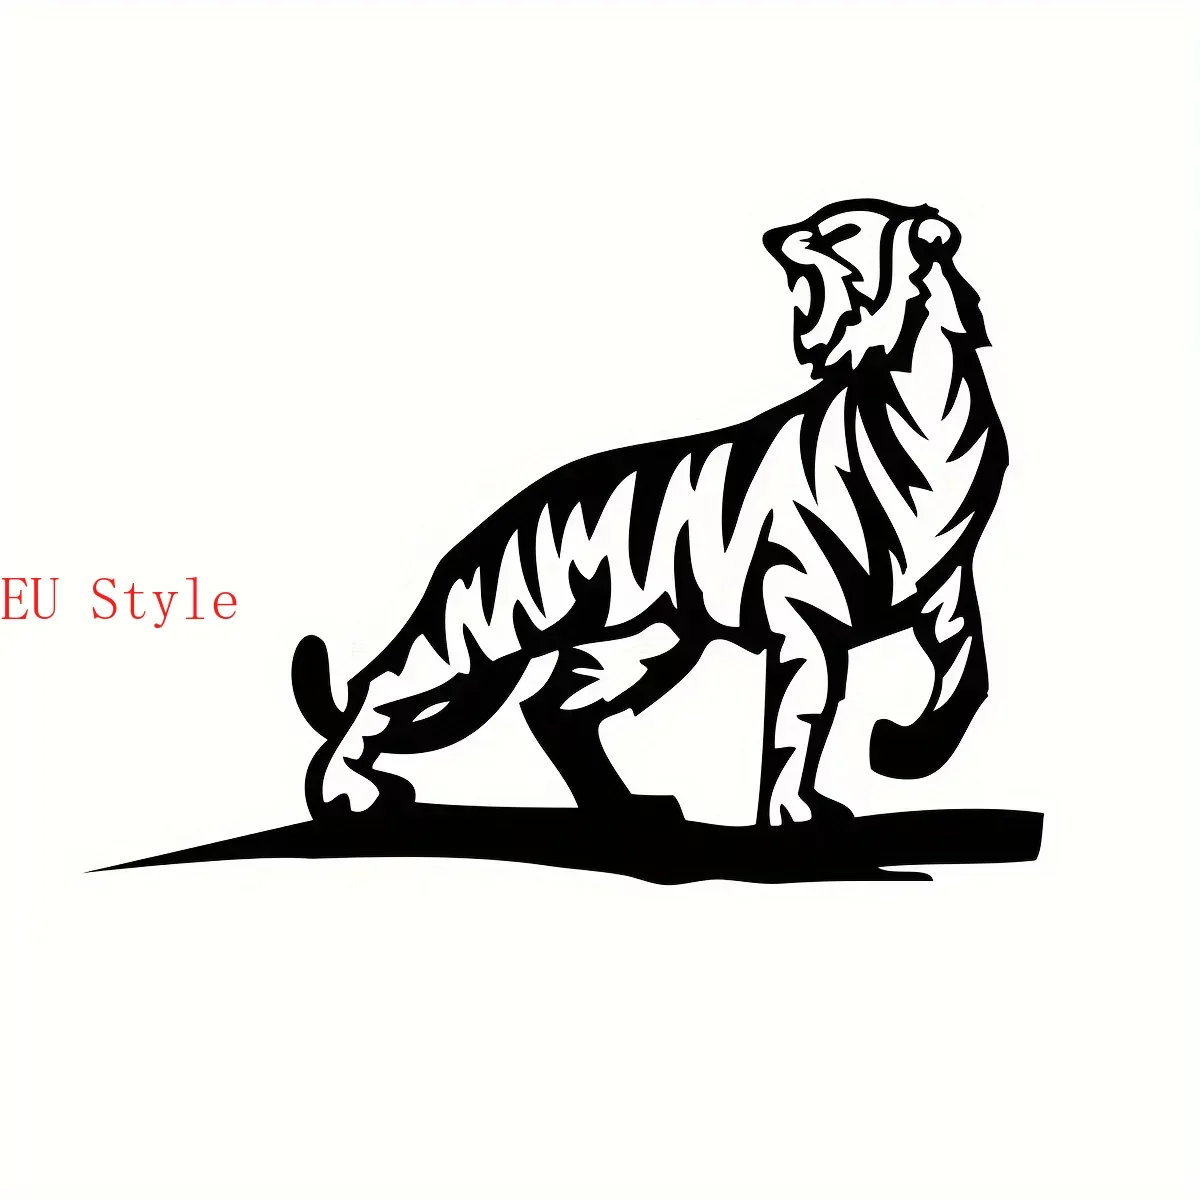 

Metal See Me Roar Tiger Silhouette Sign Cutout Rustic Decoration Outdoor Home Garden Decor Hammer Stake Housewarming Gift Outdo